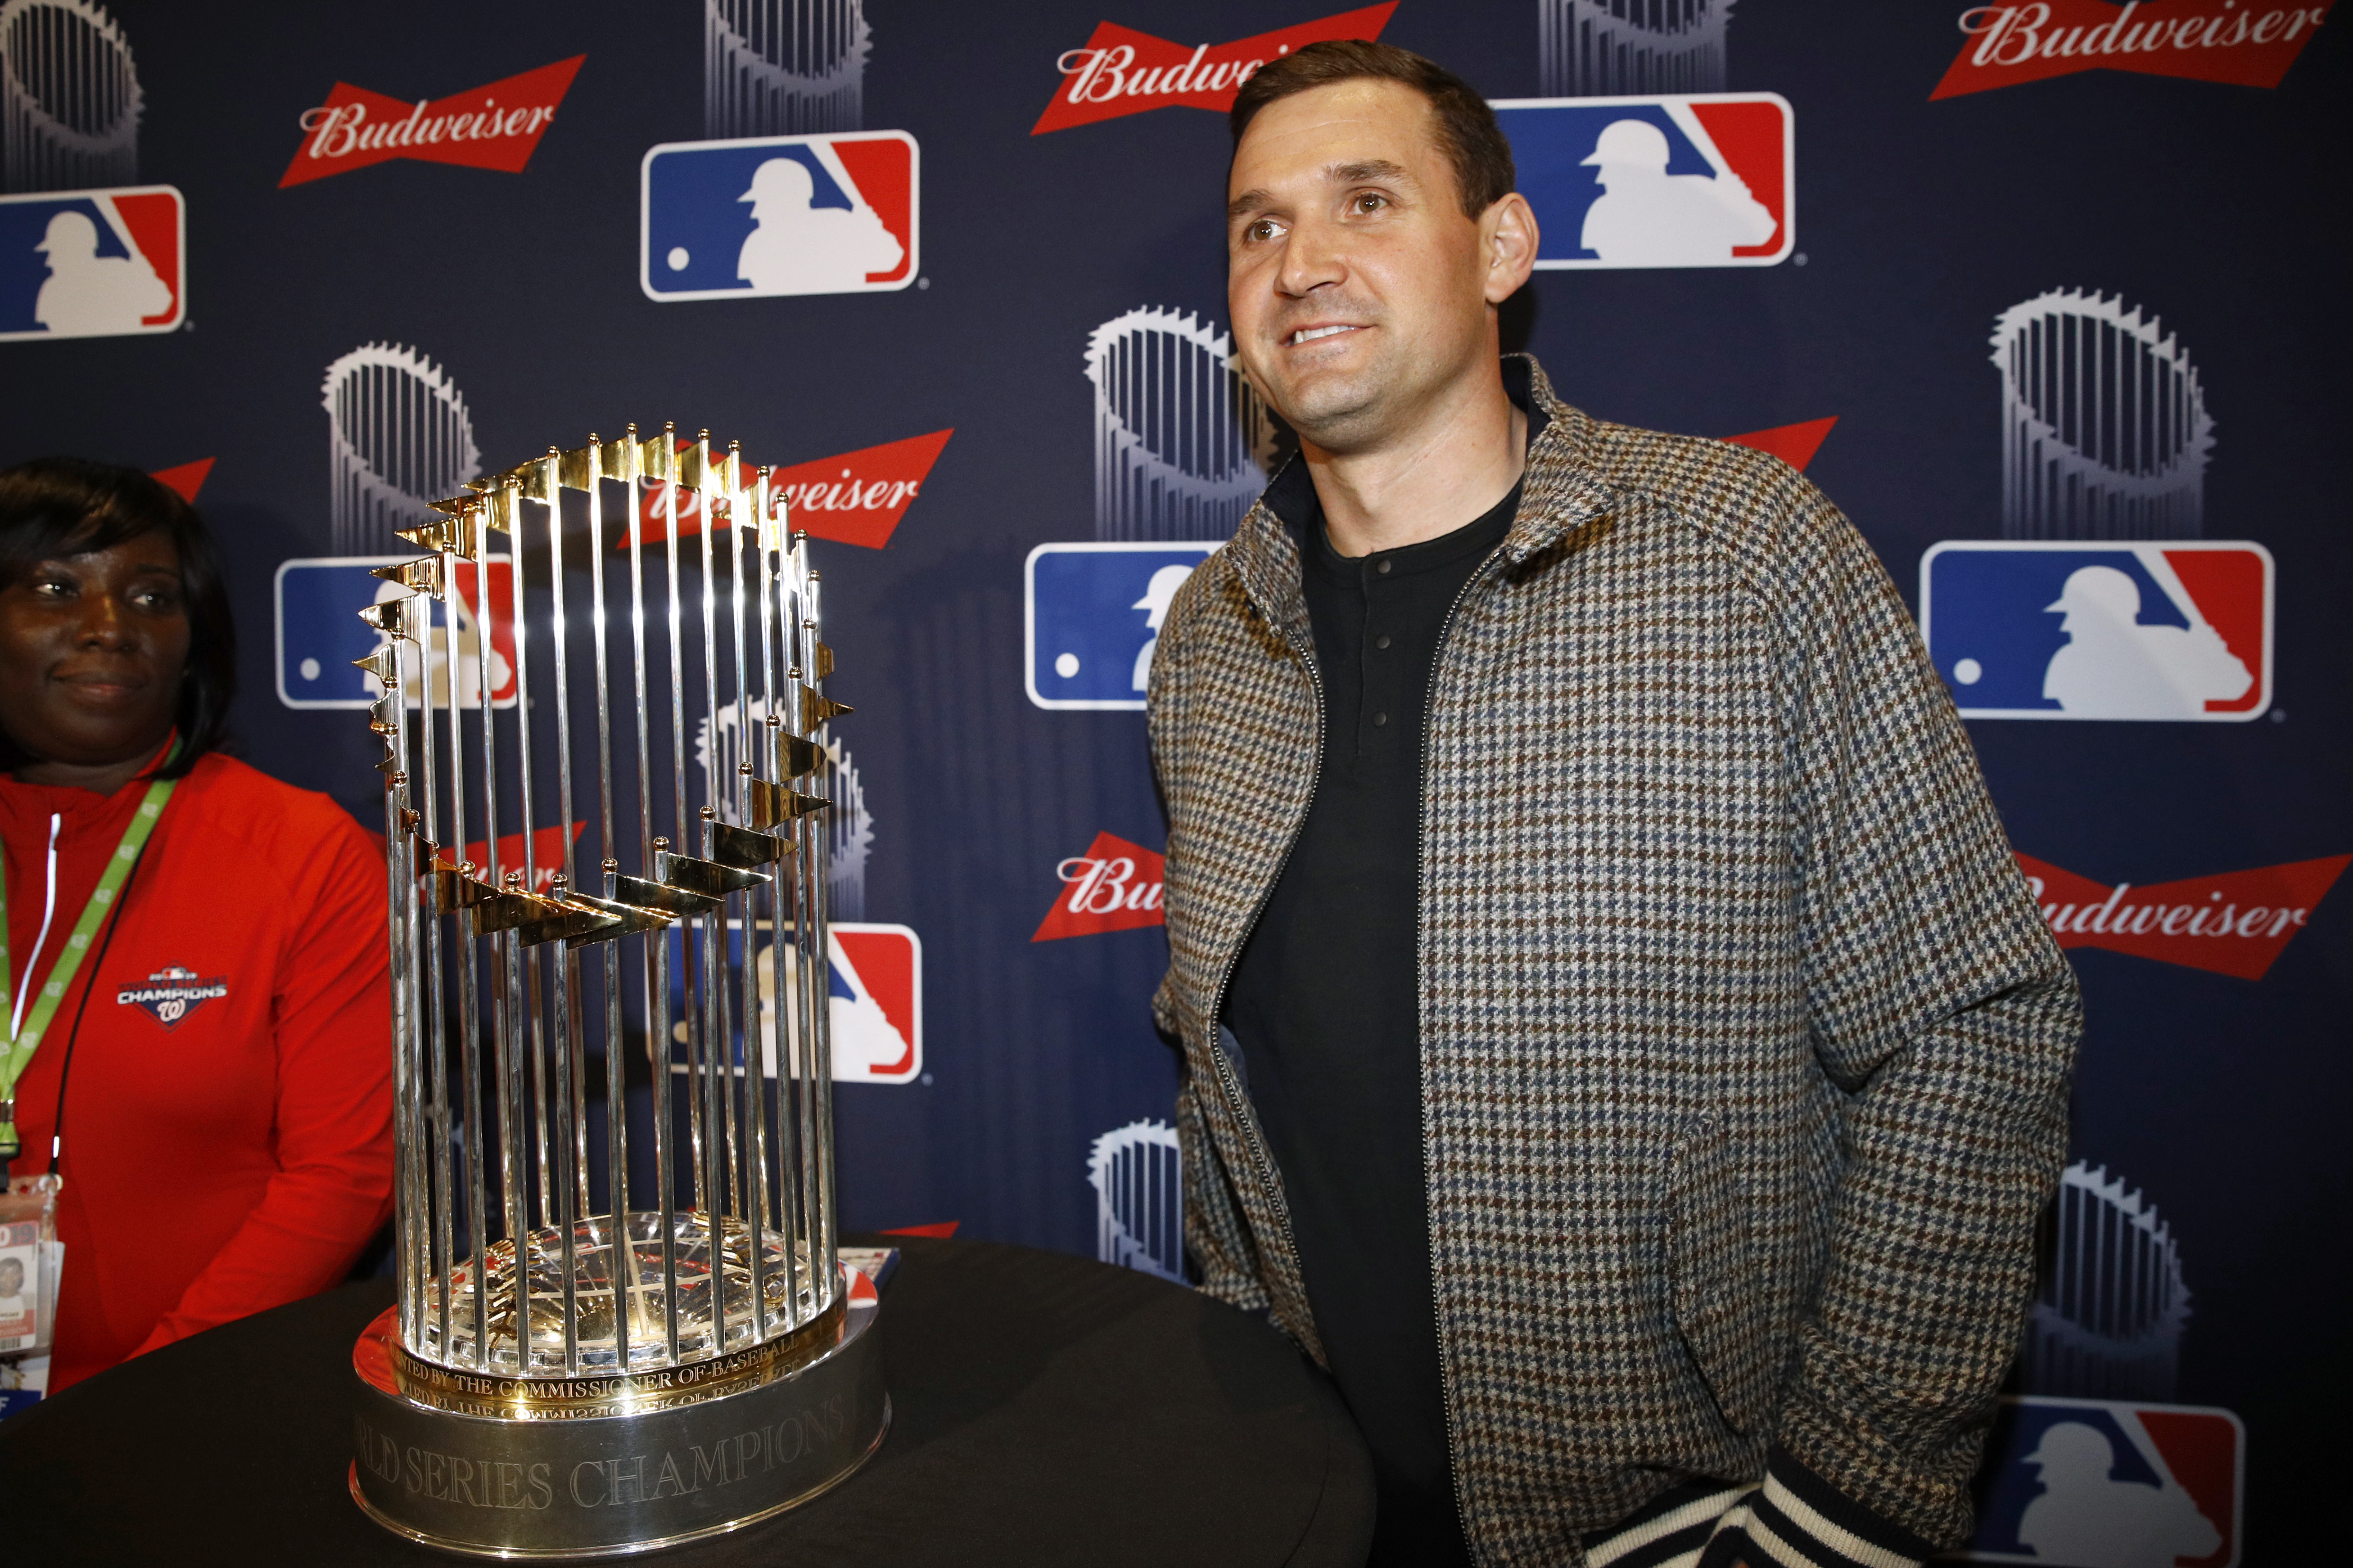 Ryan Zimmerman is selling signed t-shirts to raise money for restaurant  workers